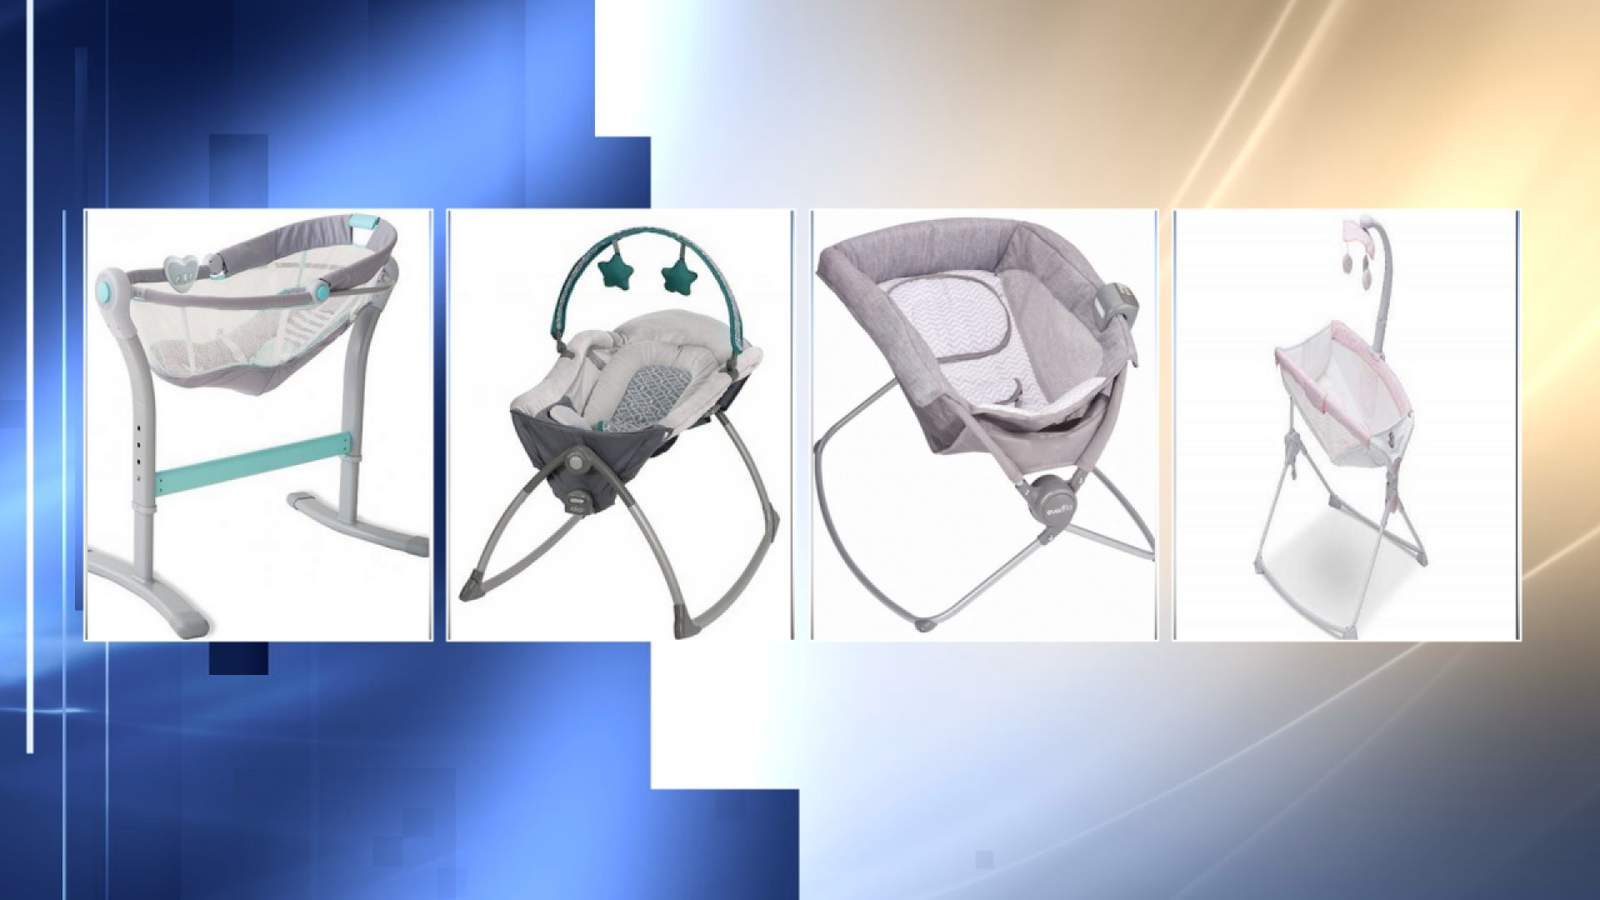 More inclined sleepers for babies recalled due to suffocation risk